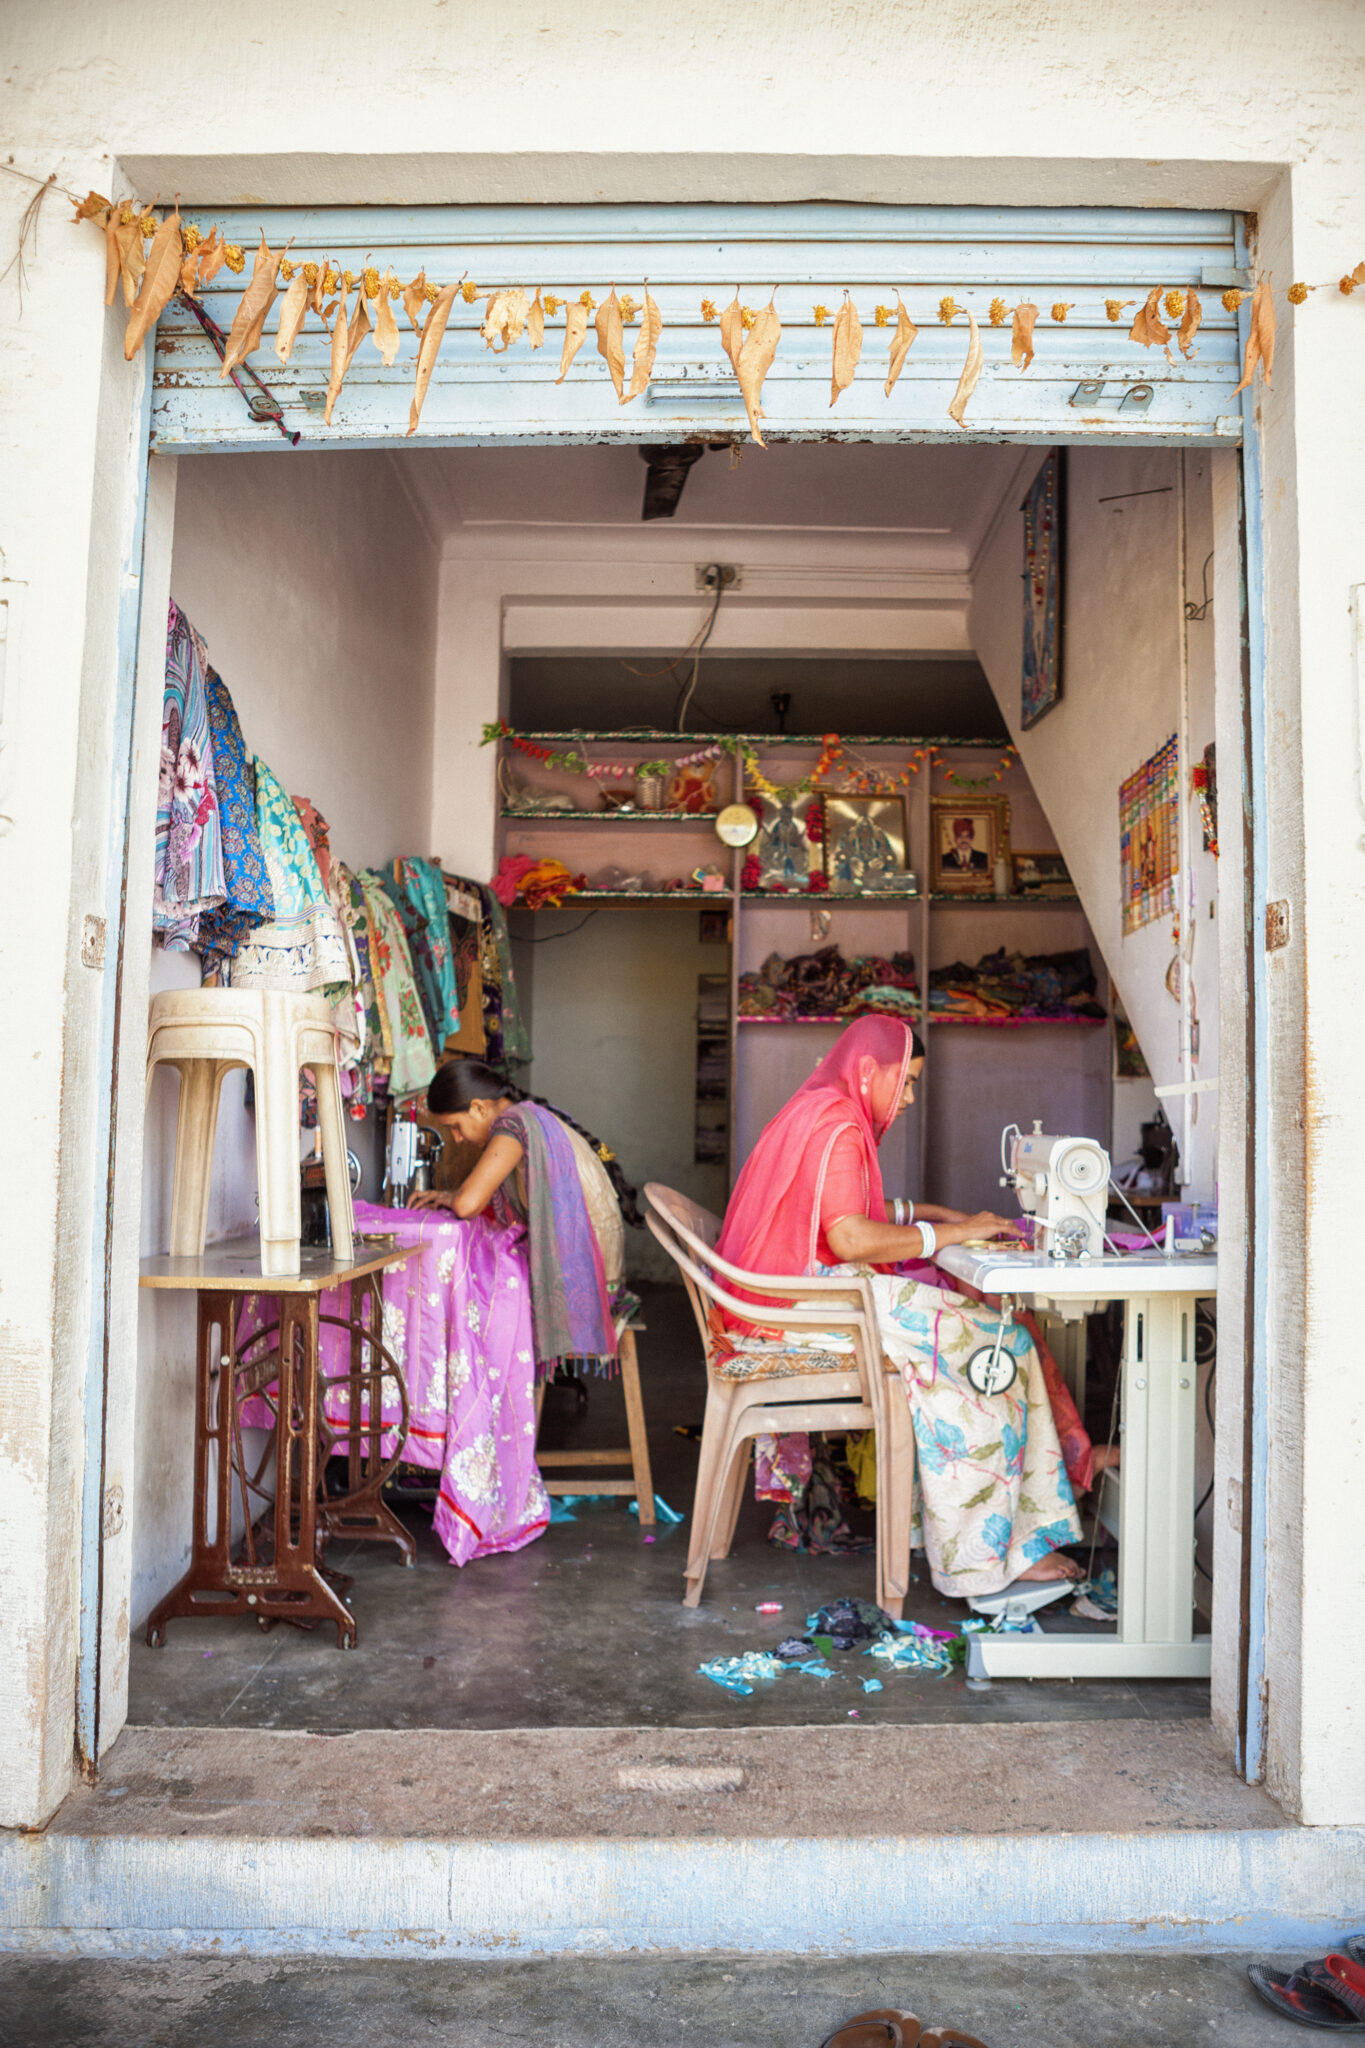 Two women sewing in a small shop on the street of Nimaj, India